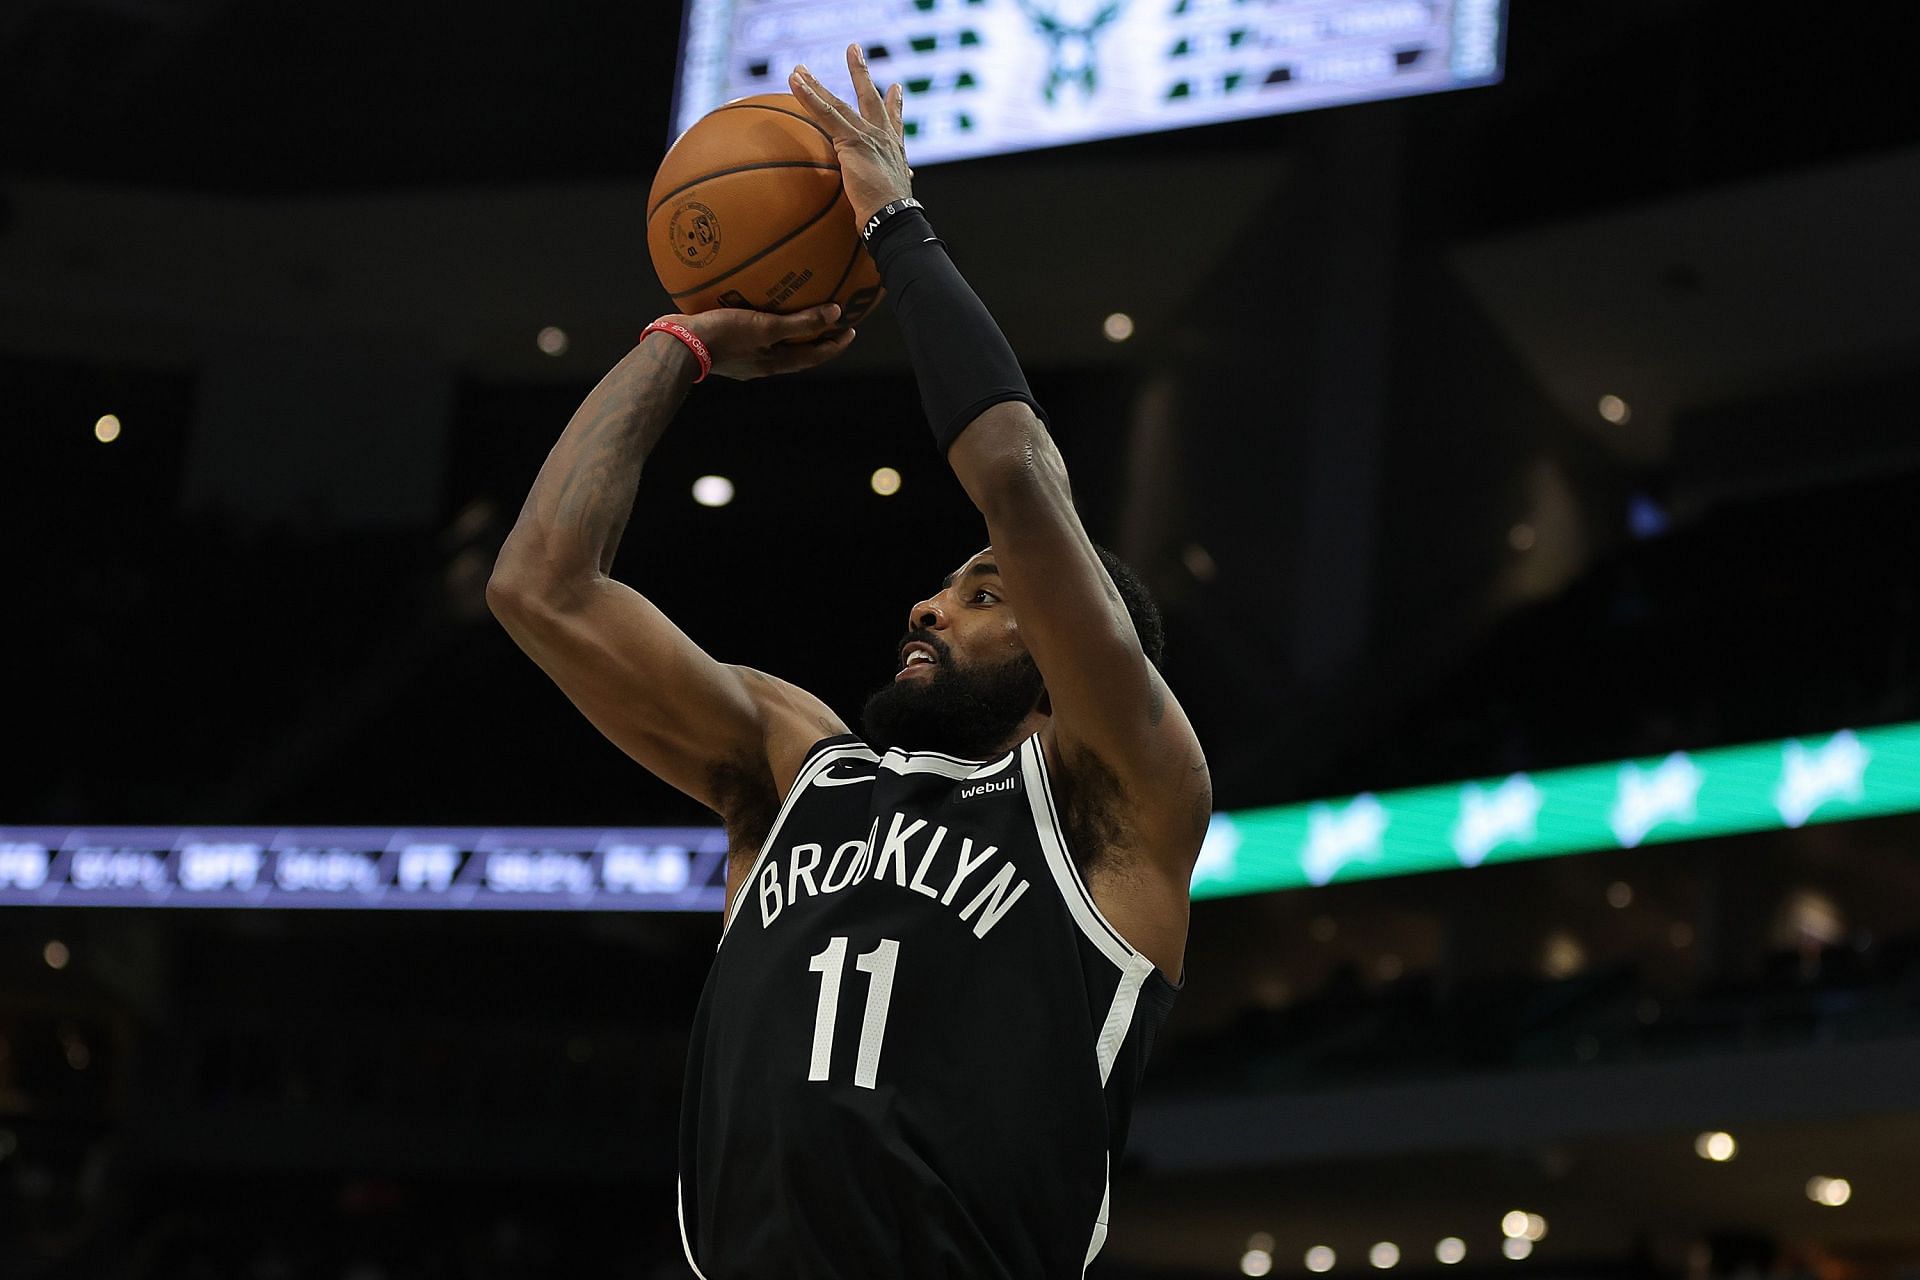 Kyrie Irving of the Brooklyn Nets could be a top free agent next summer.